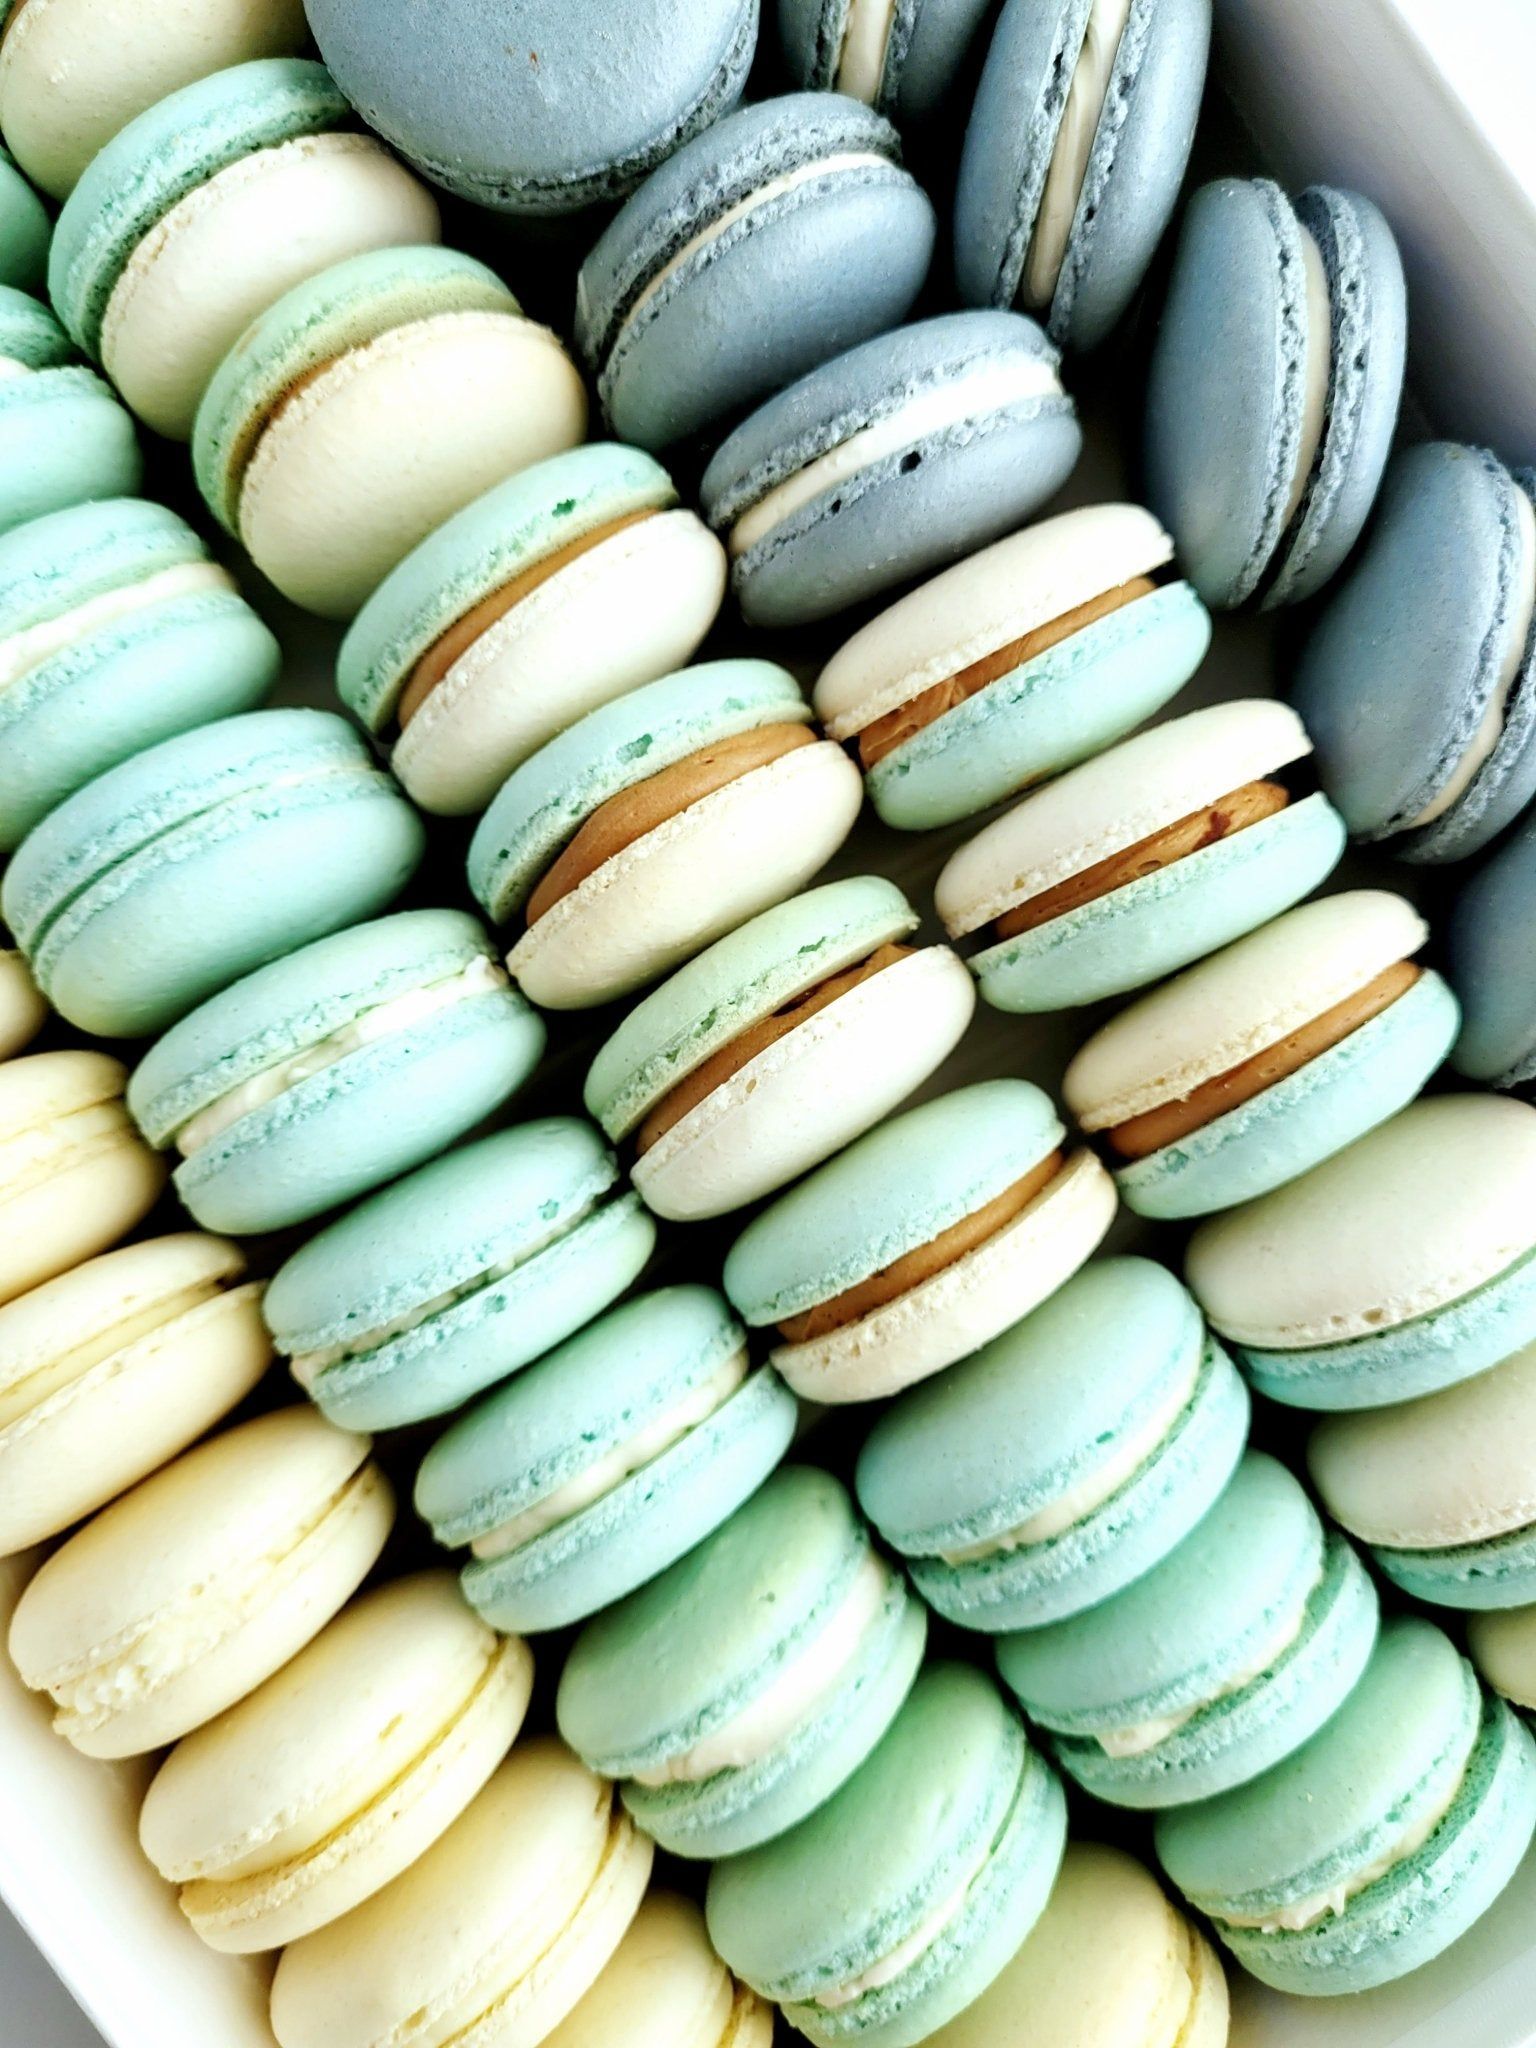 A plate of macarons in a variety of colors. - Macarons